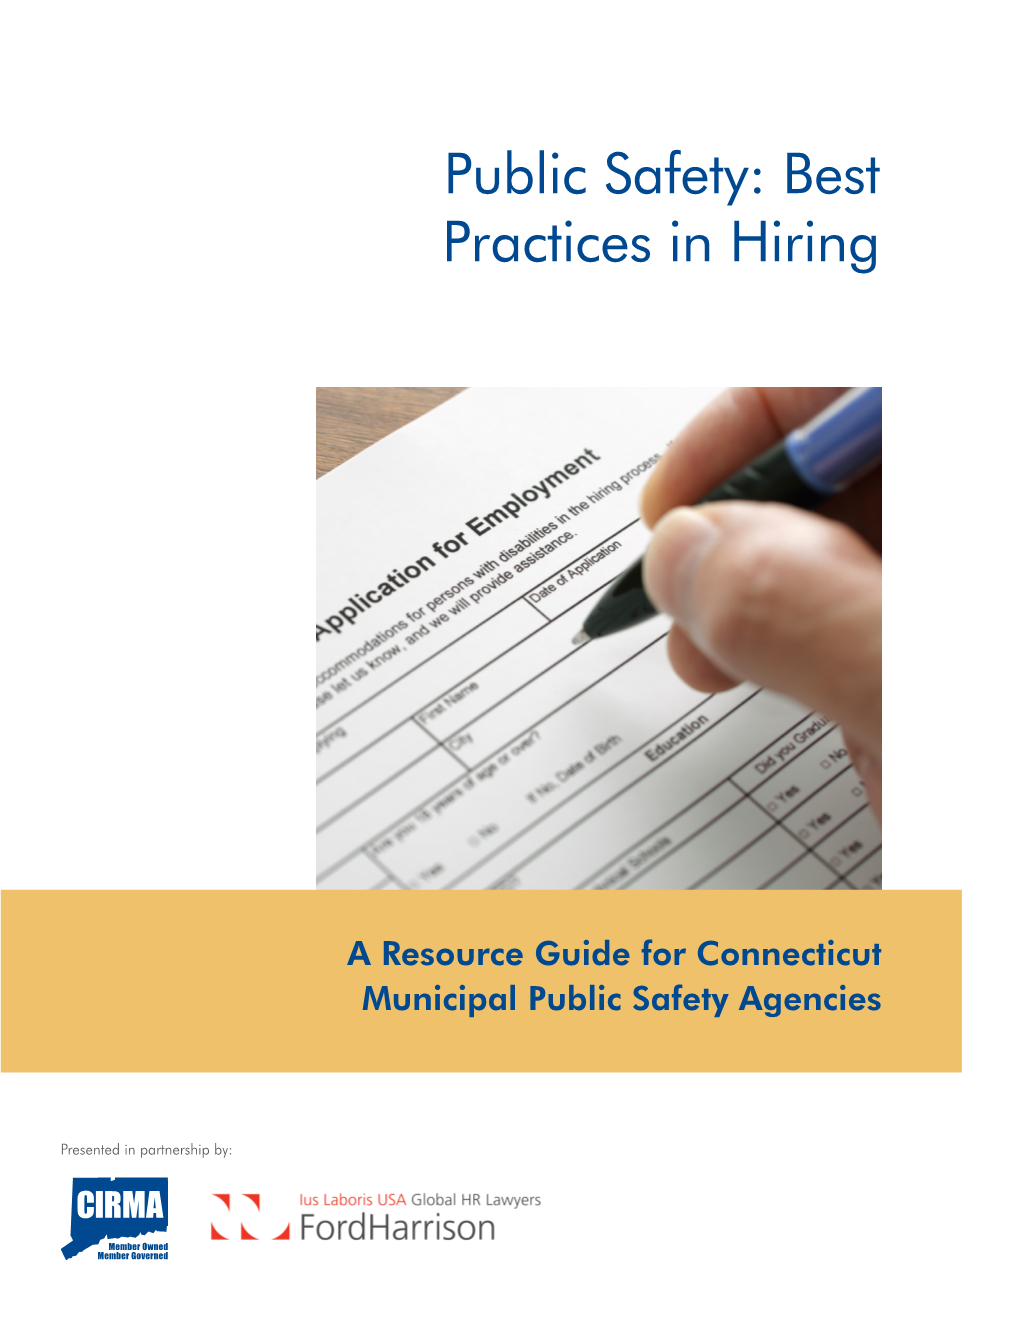 Public Safety: Best Practices in Hiring